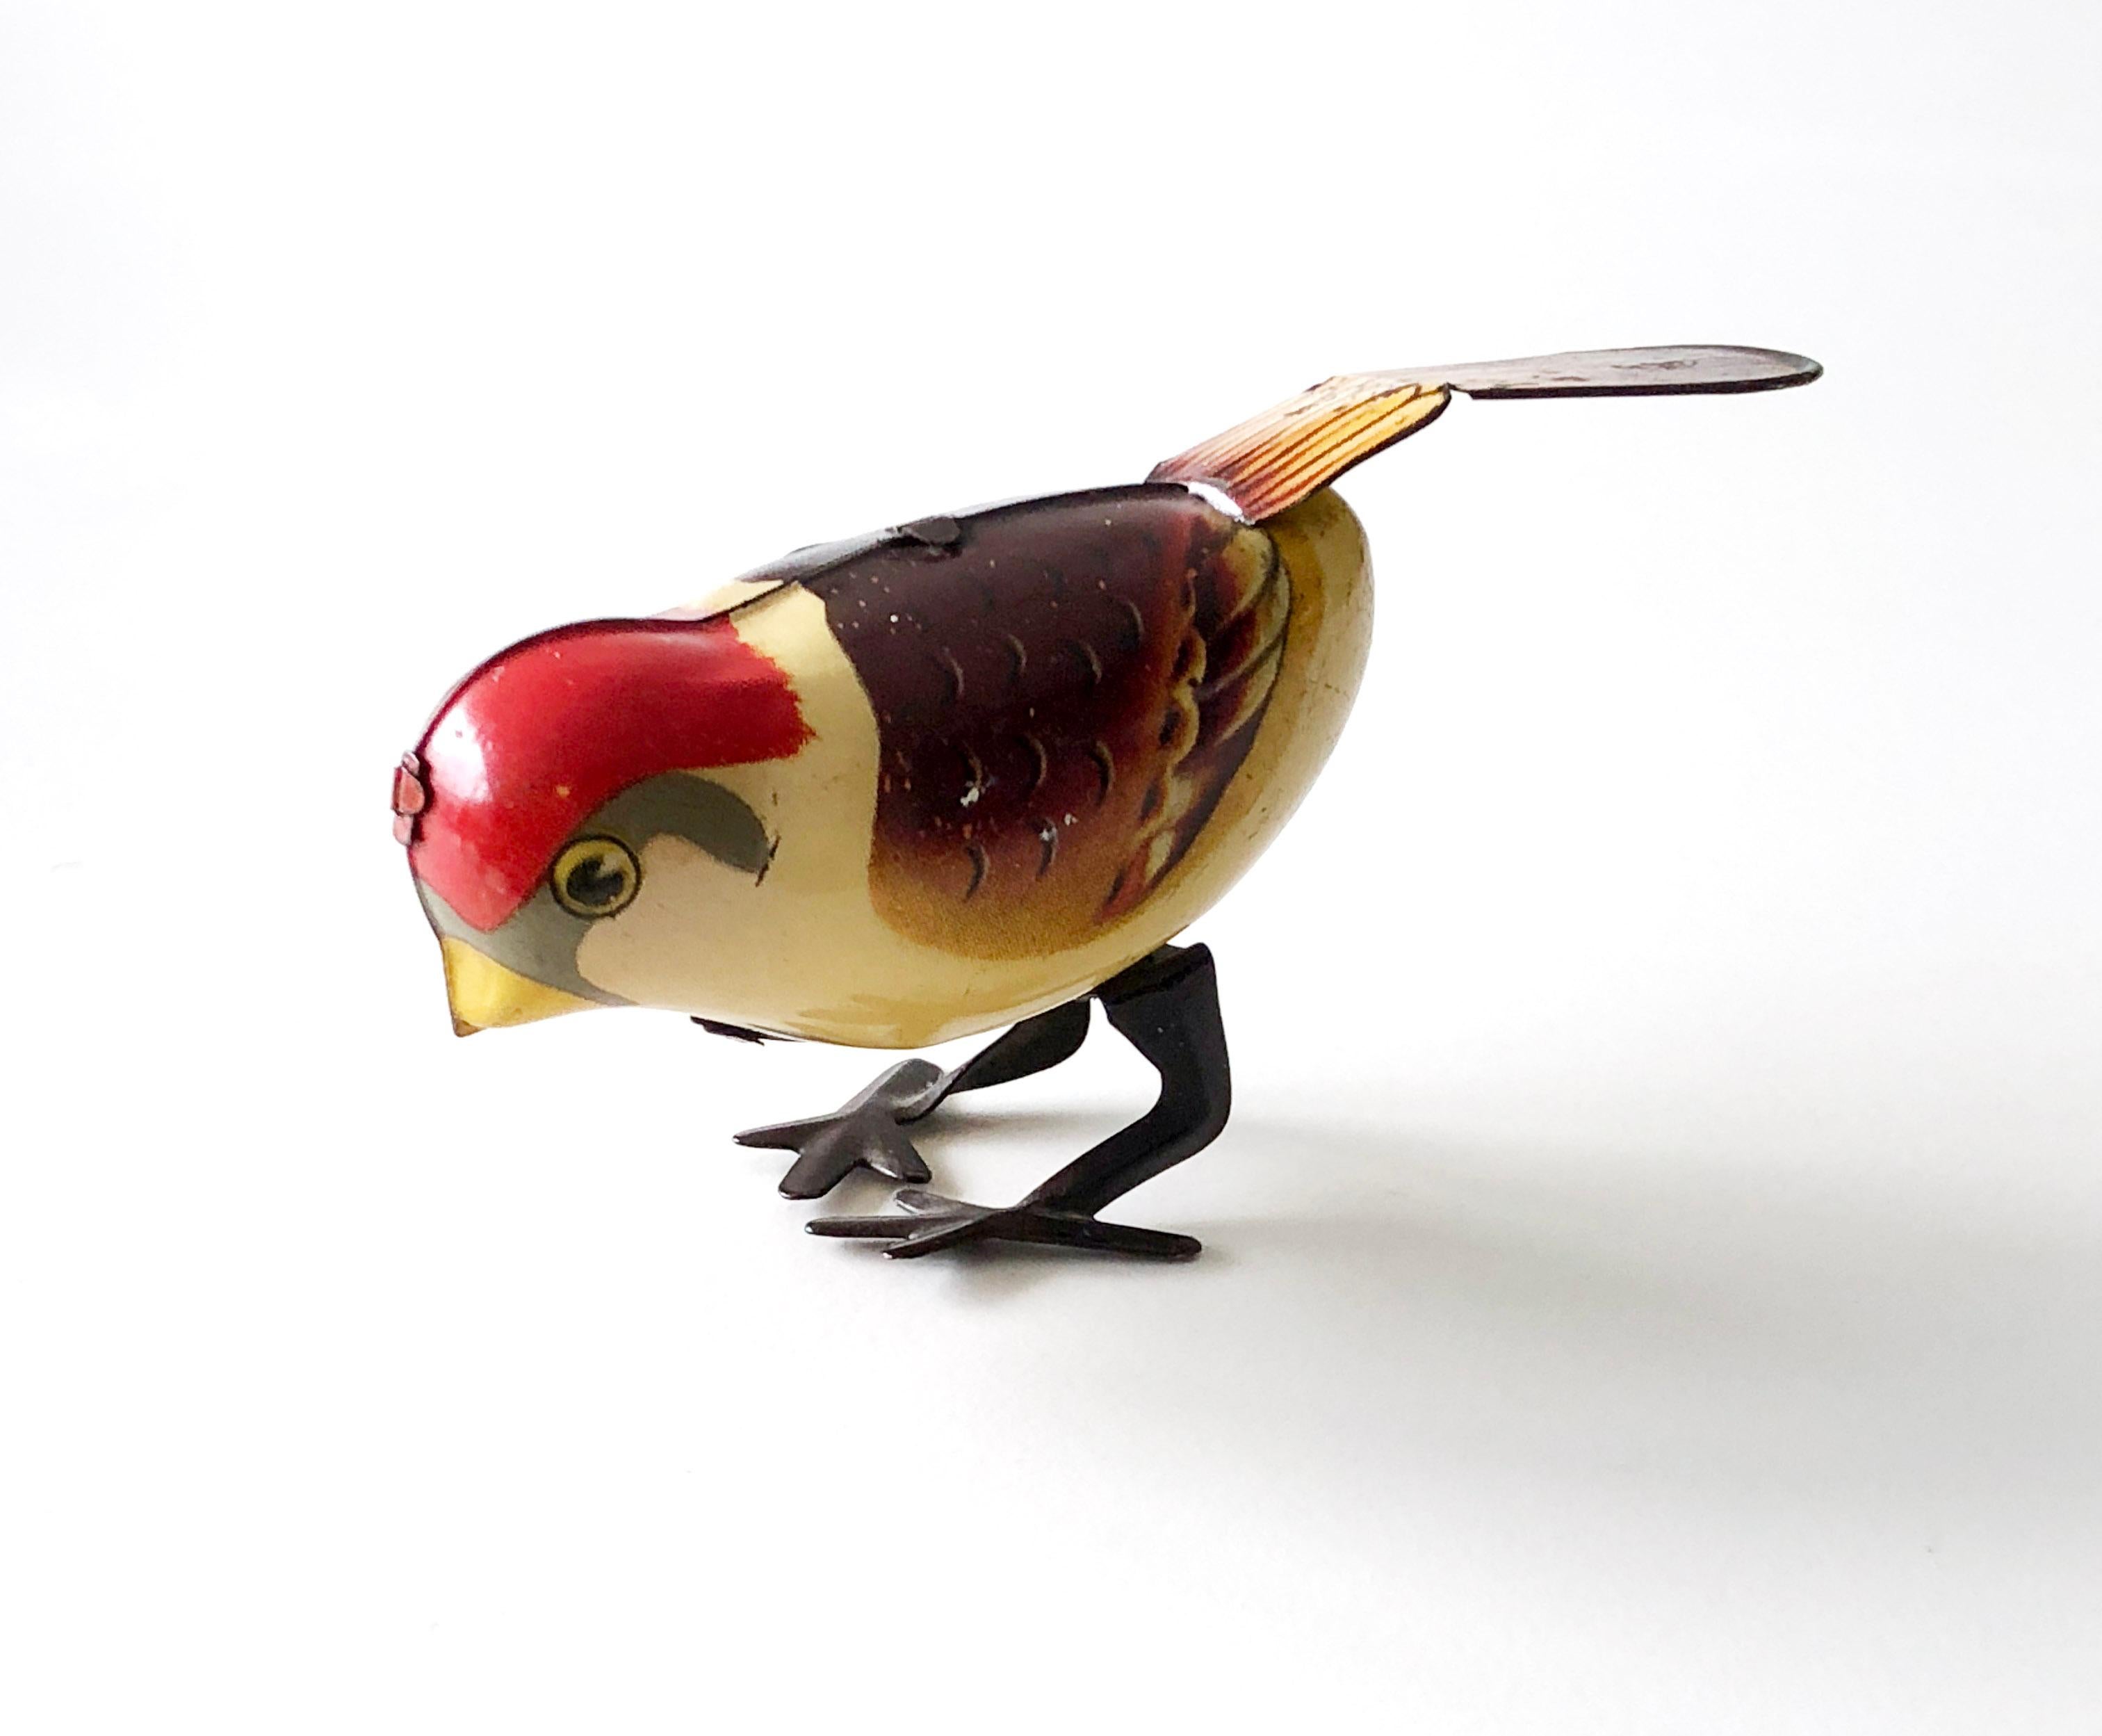 Vintage wind-up Sparrow toy with a mechanical tinplated clockwork mechanism - 1960s
Manufactured in China in the late 1960s, this sparrow toy features a lithographed tinplate bird with a clockwork mechanism housed in its body, and a key protruding